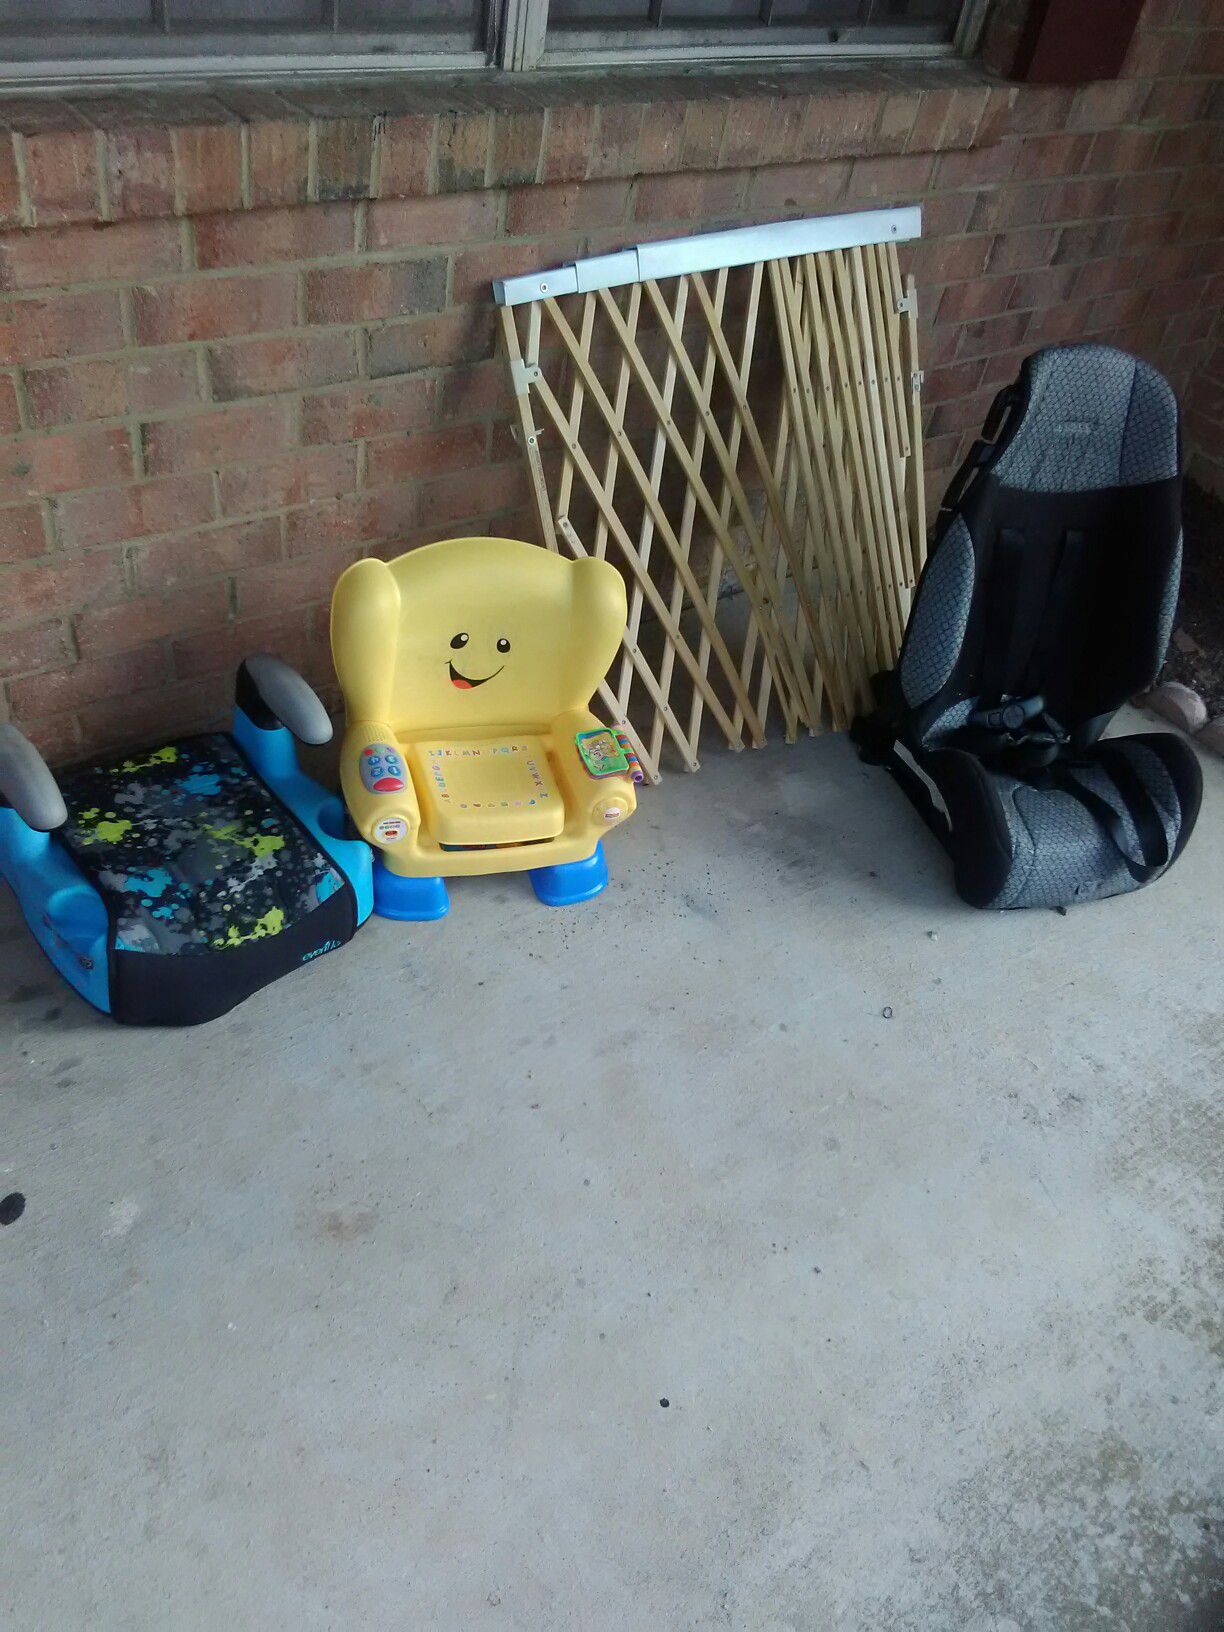 Kids Car seat, booster seat, kids chair, baby gate. All for one low price